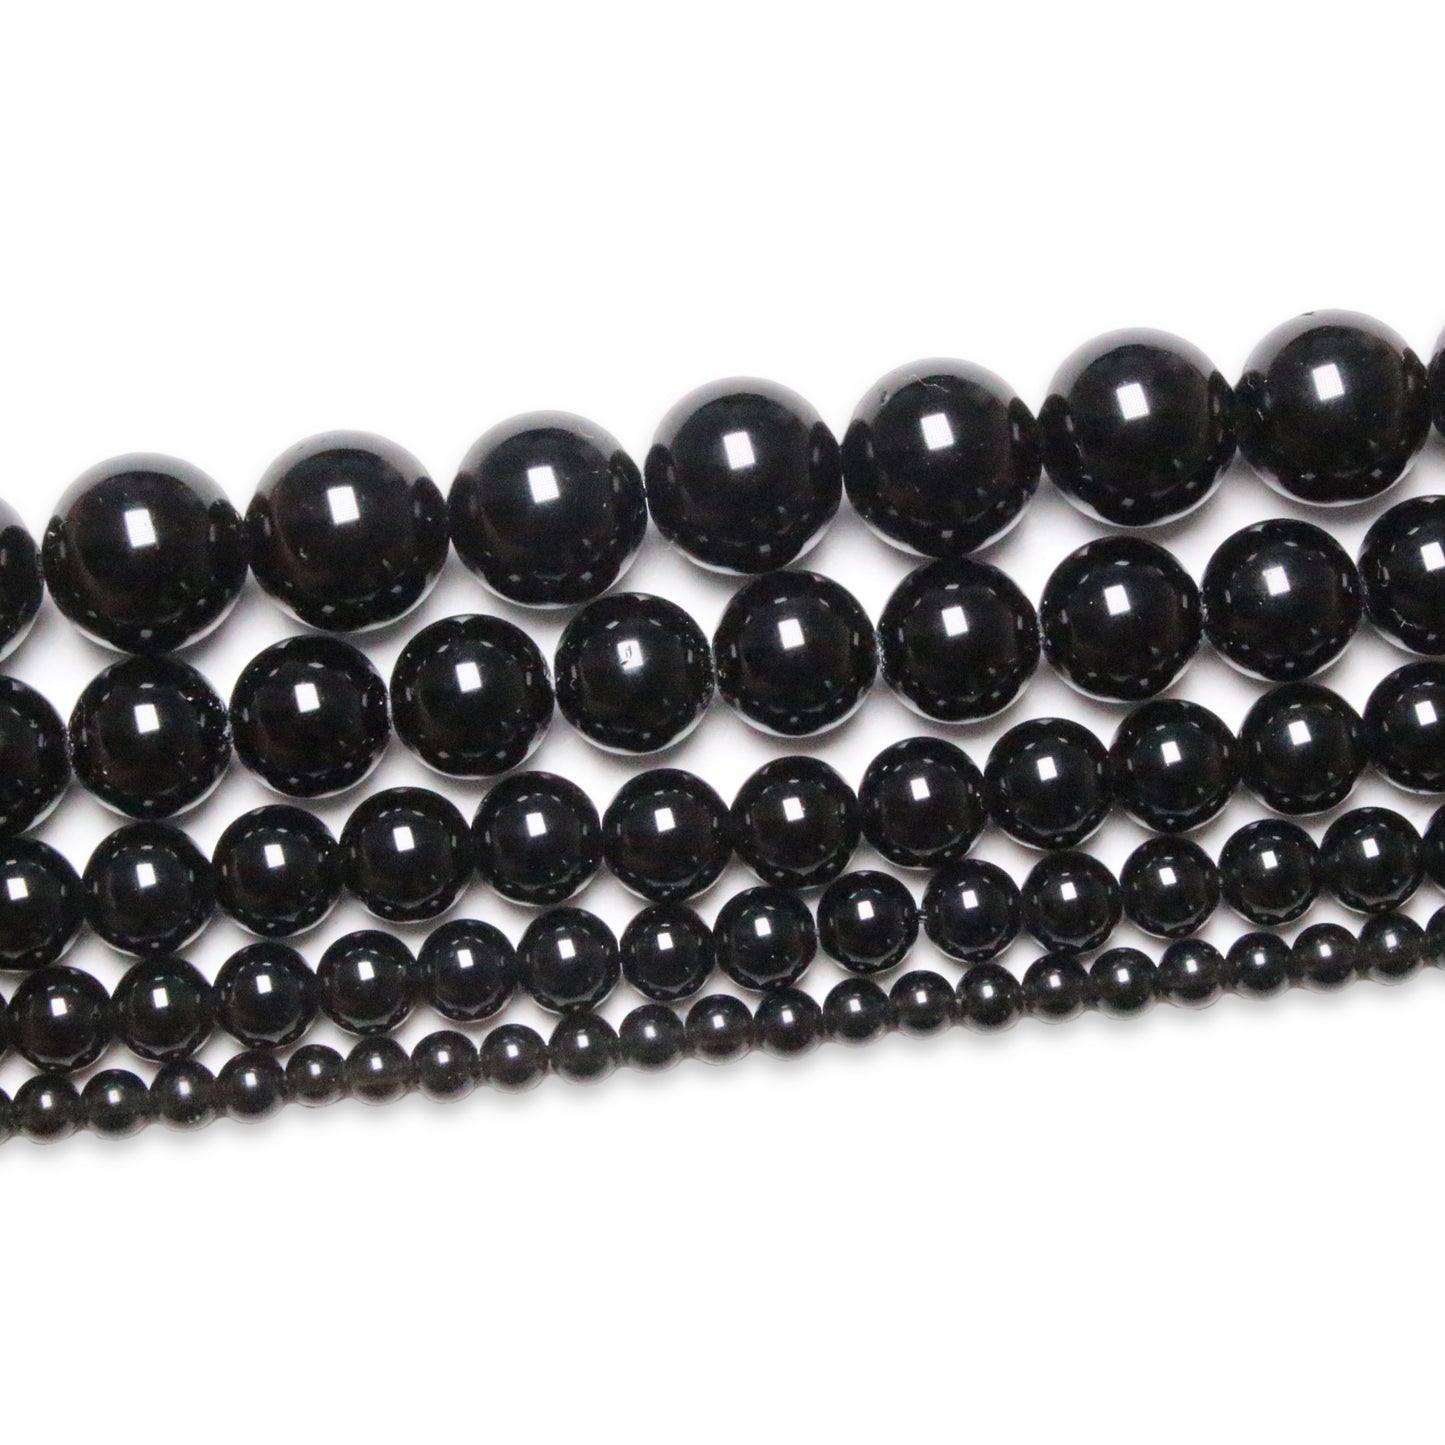 Black spine pearl wire